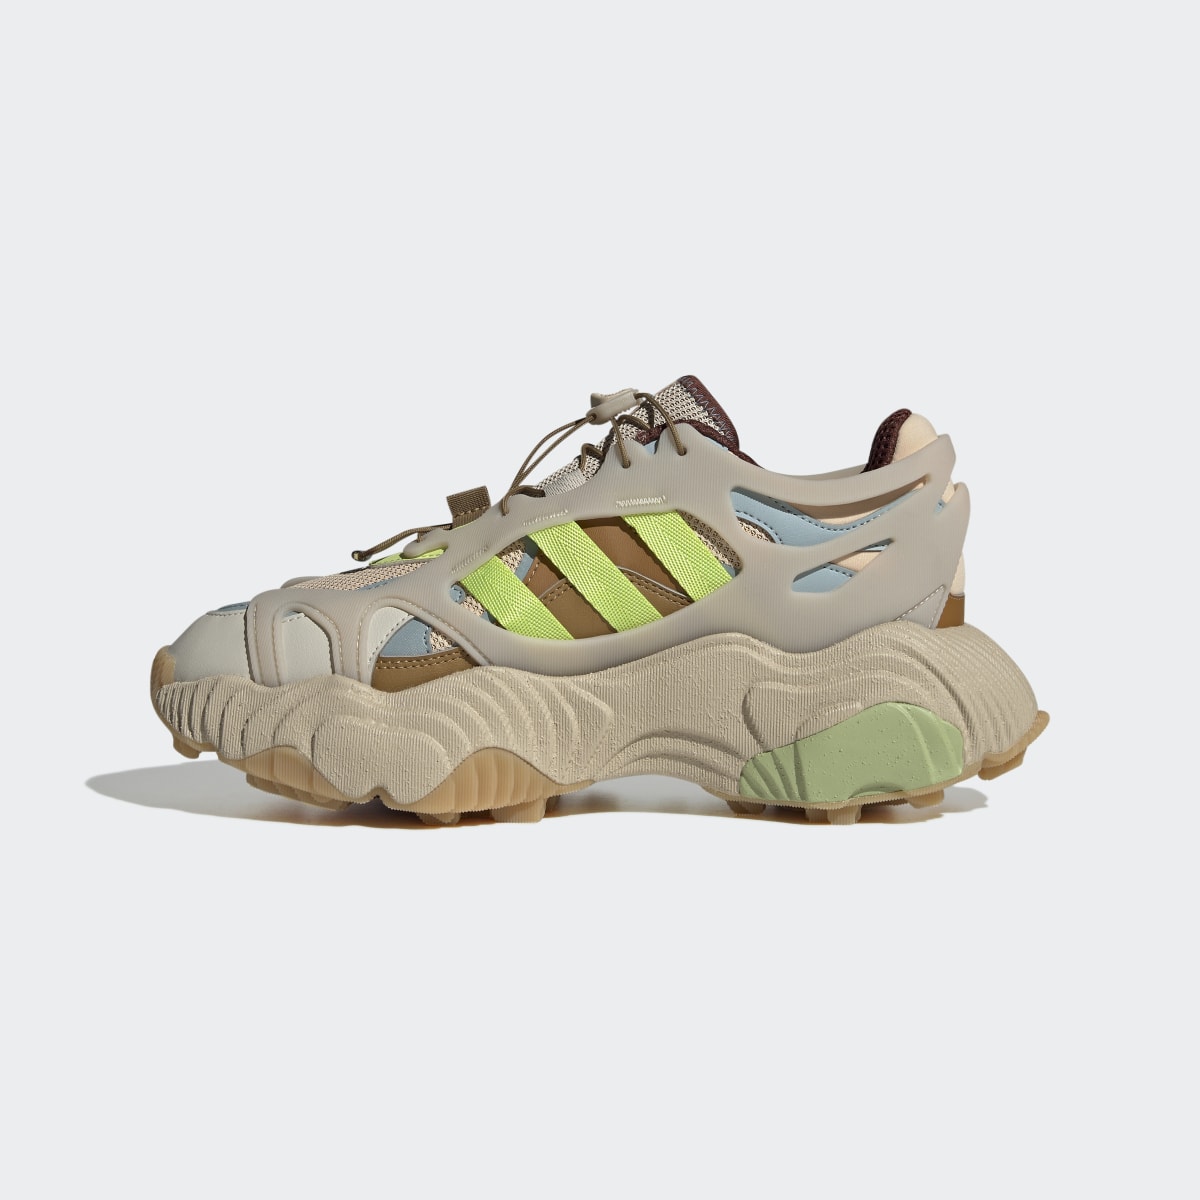 Adidas Roverend Adventure Shoes. 7